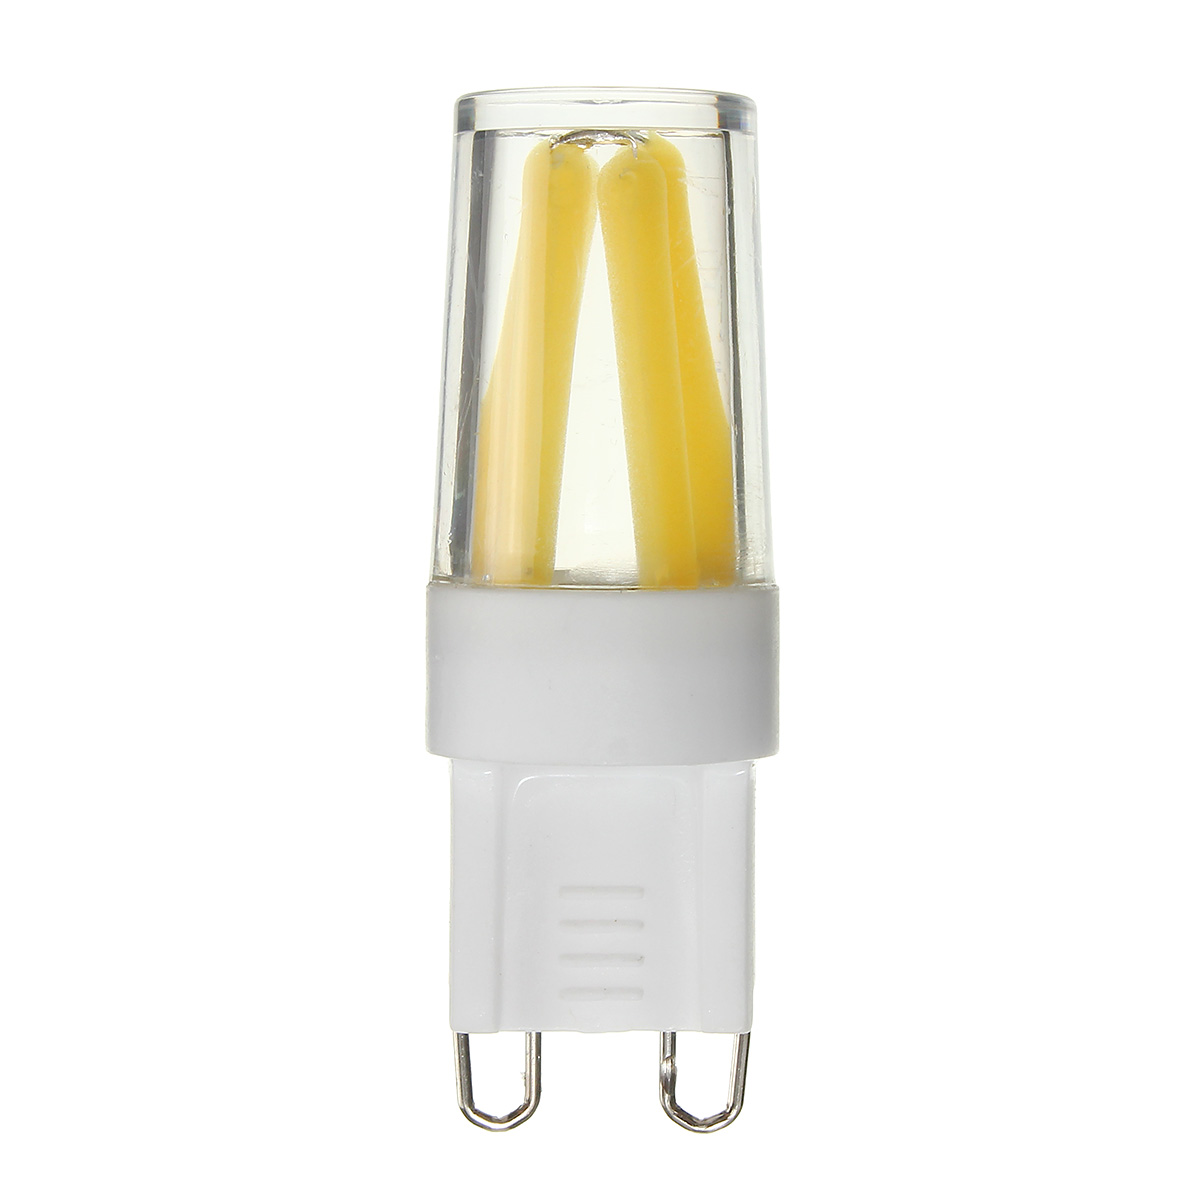 2W-G9-Dimmable-LED-Pure-White-Warm-White-Corn-Bulb-Silicone-Crystal-COB-Lamp-Light-AC-220V-1292383-2